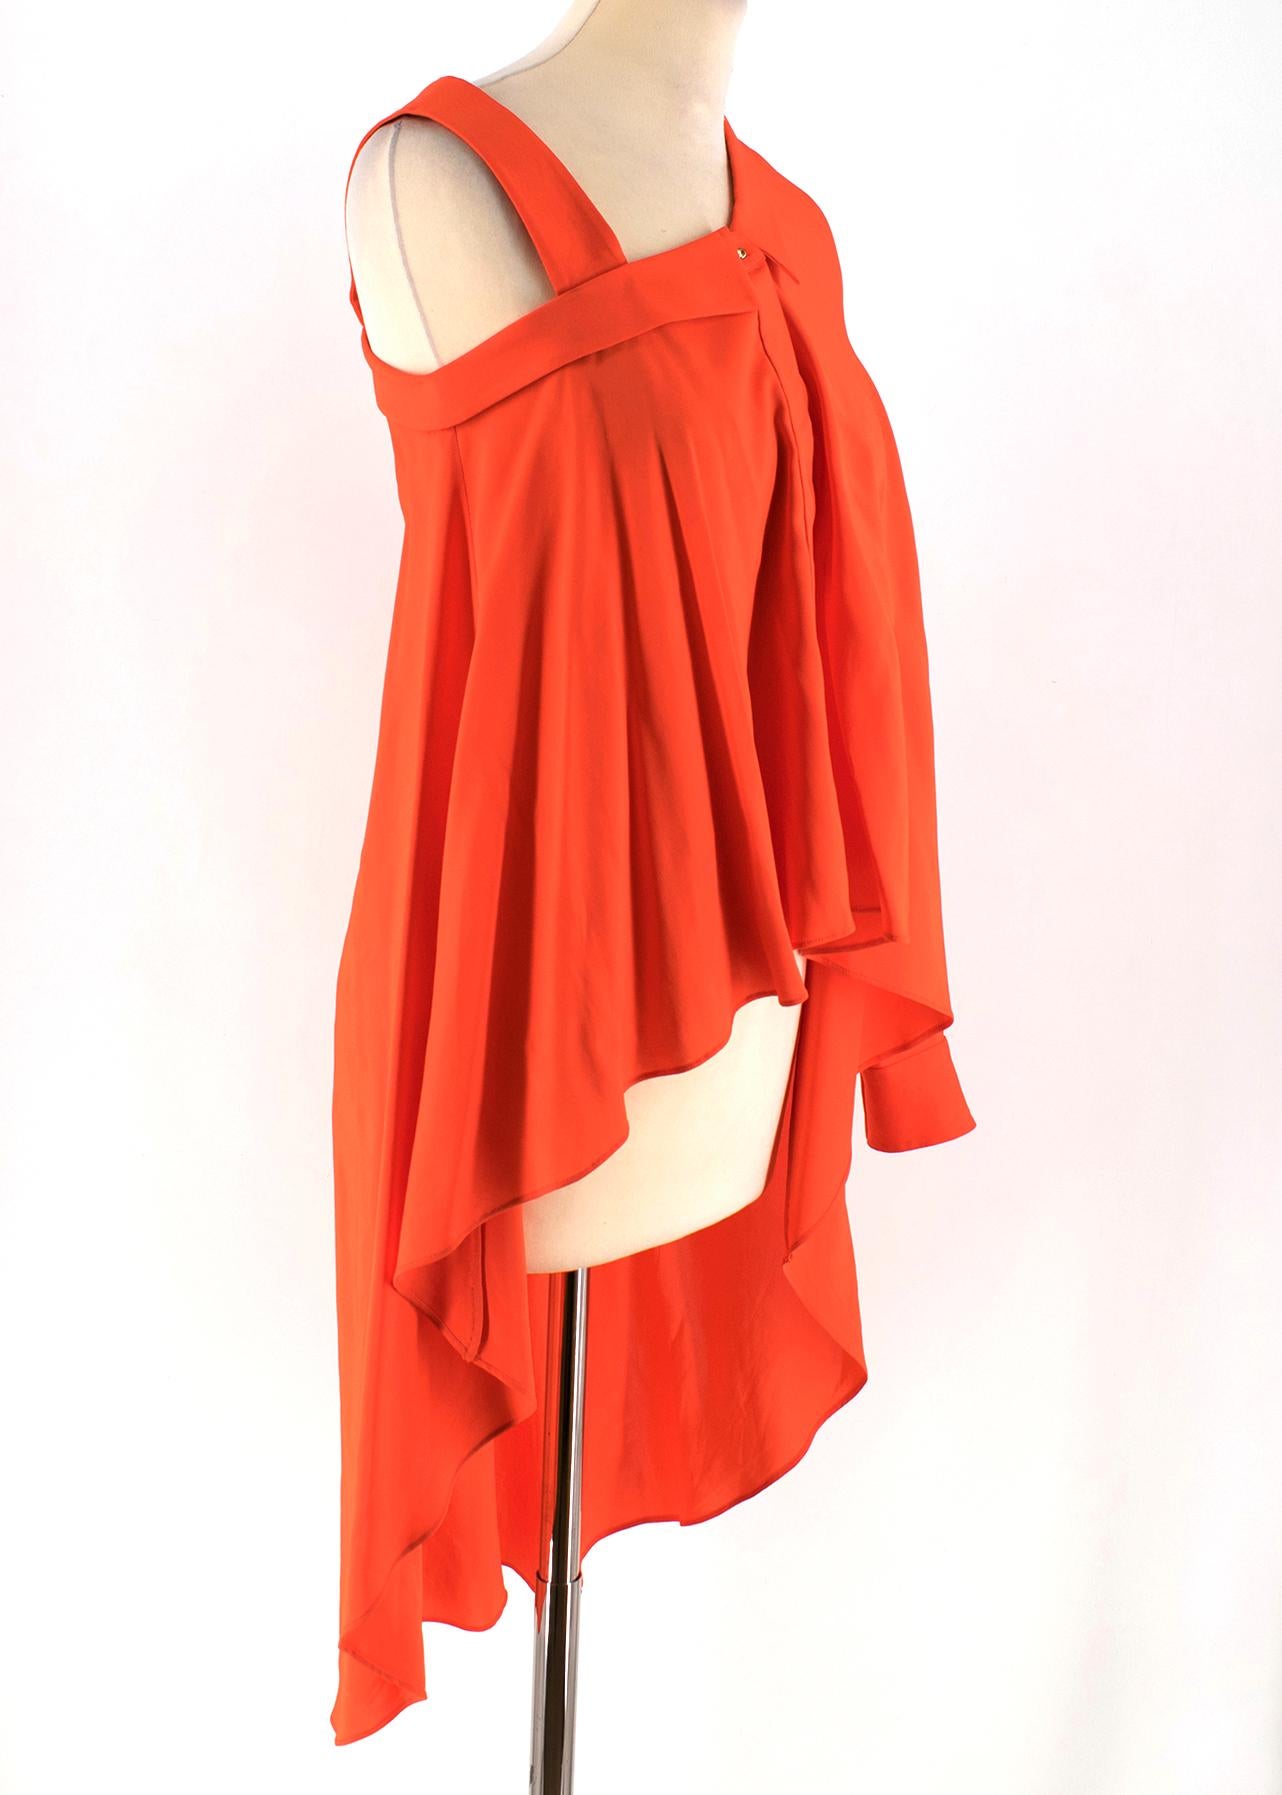 Viktor & Rolf Neon Orange Top

- Neon orange shirt
- Asymmetric neckline
- Left arm long sleeve with ruched cuff
- Right arm sleeveless with a shoulder strap
- Centre-front button fastening
- Asymmetric length, short-length front and long-length